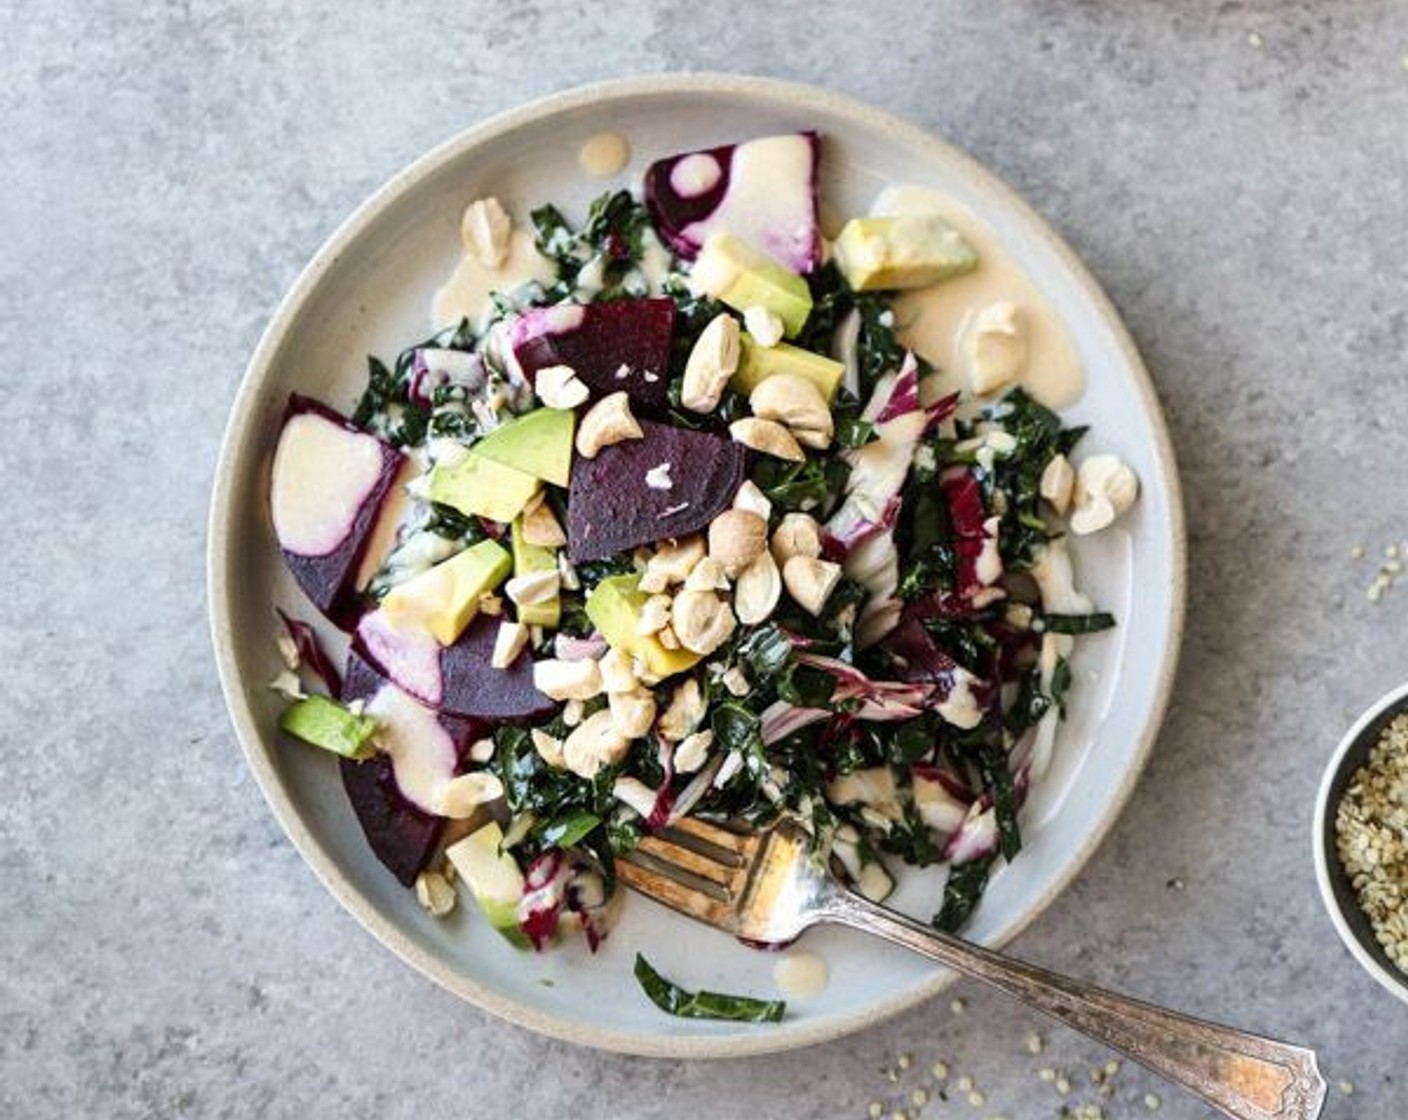 Kale Salad with Beets, Avocado and Tahini Dressing